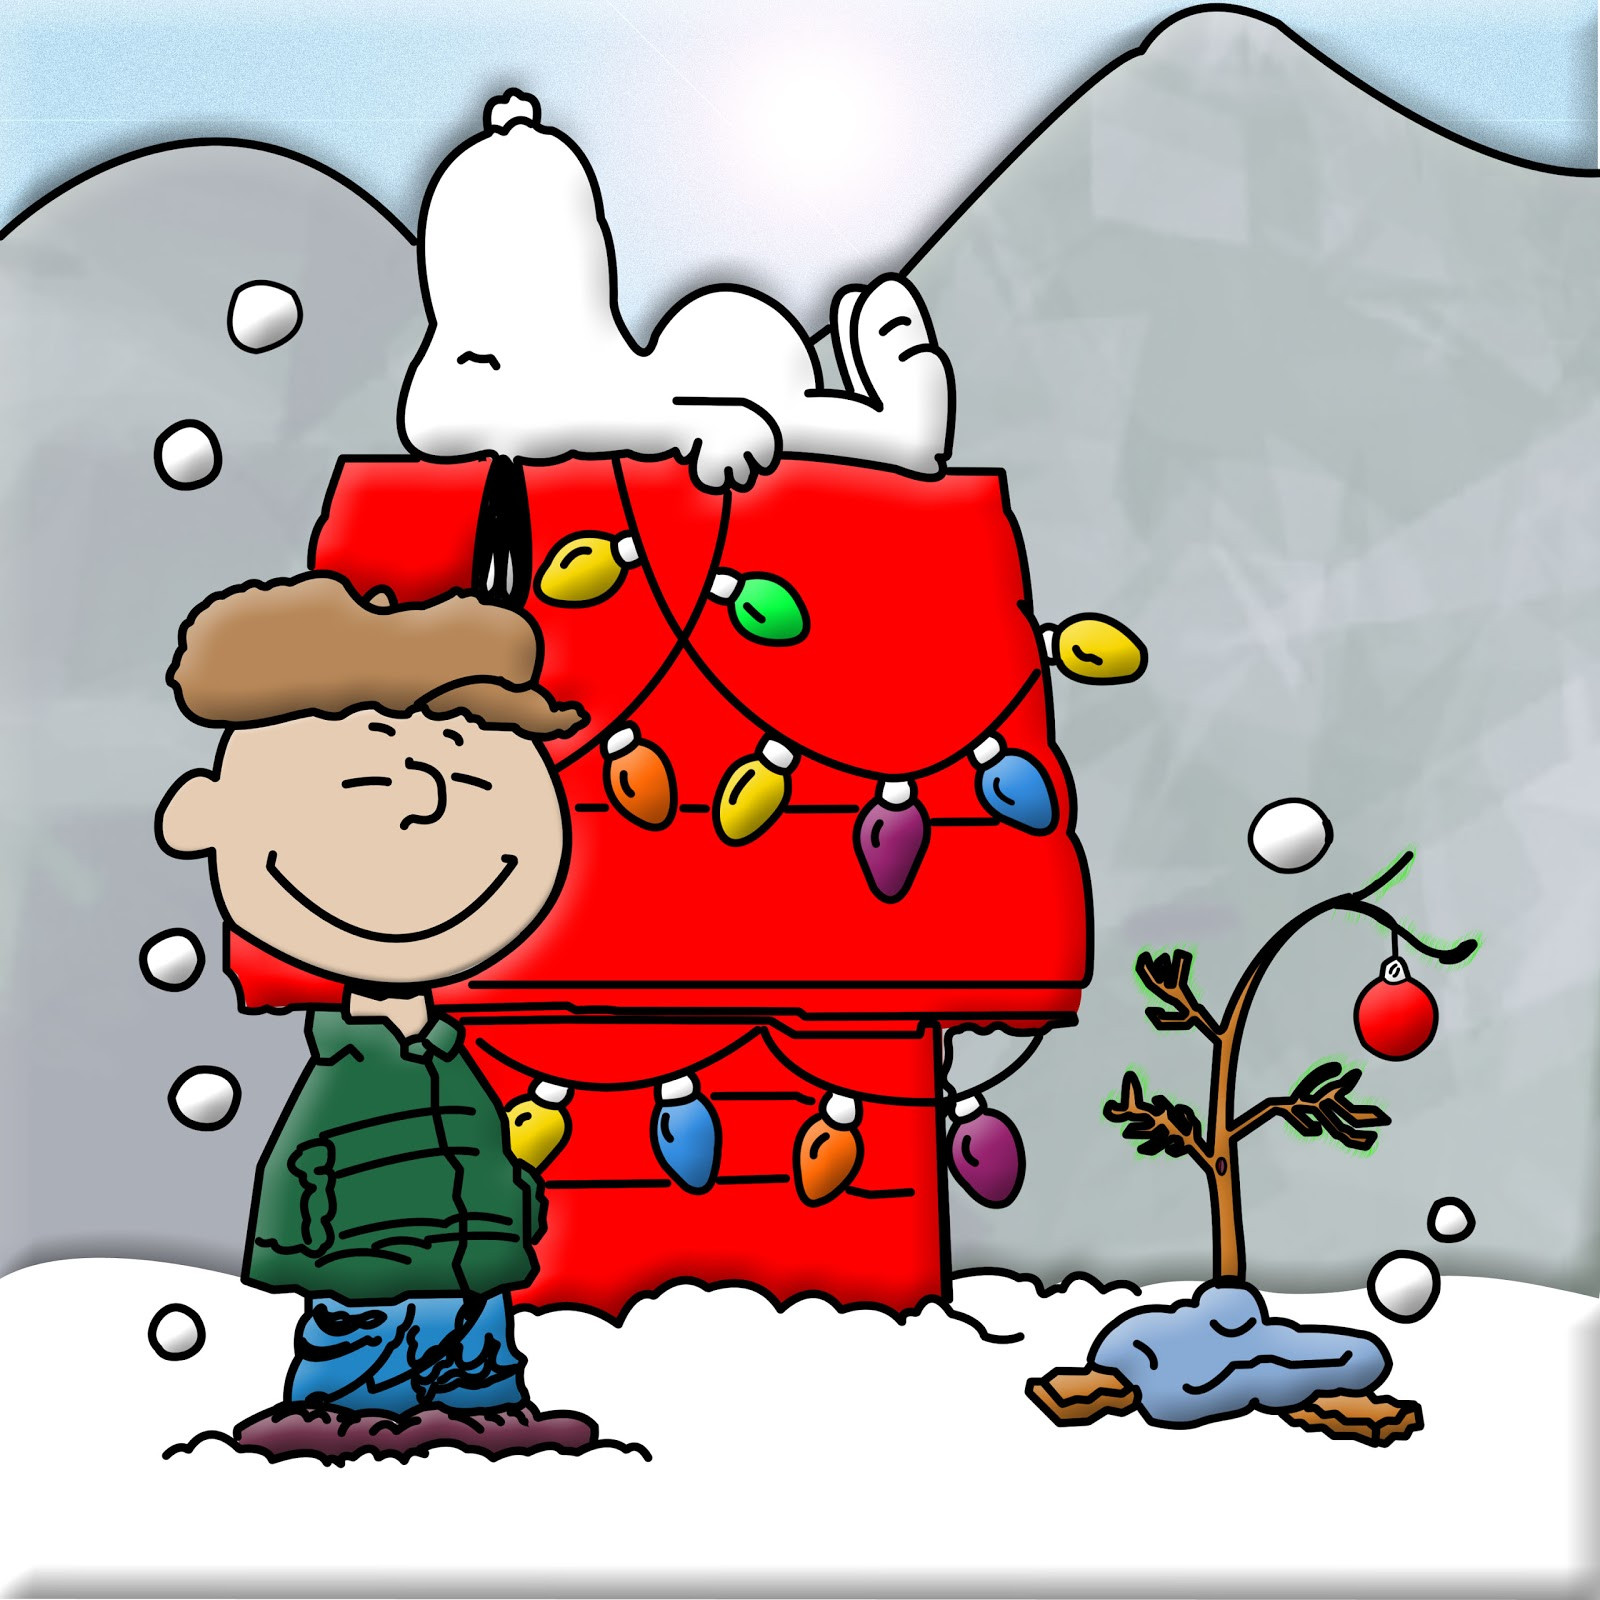 Peanuts Christmas Quotes
 Finding Happiness e Quote at a Time Feeling Triumphant